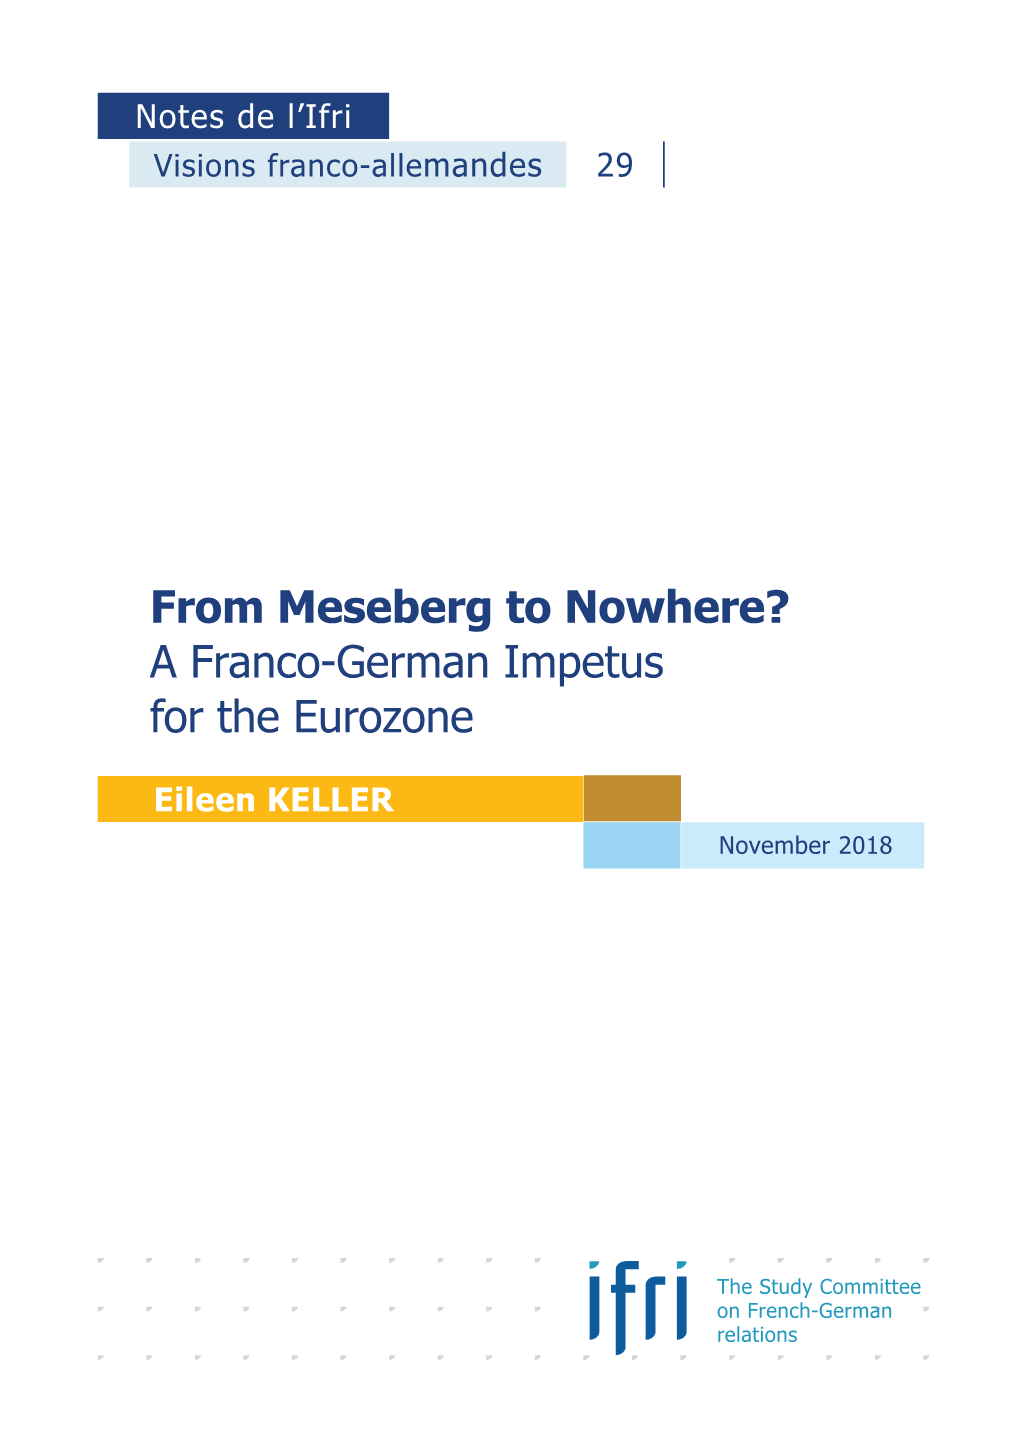 From Meseberg to Nowhere? a Franco-German Impetus for the Eurozone